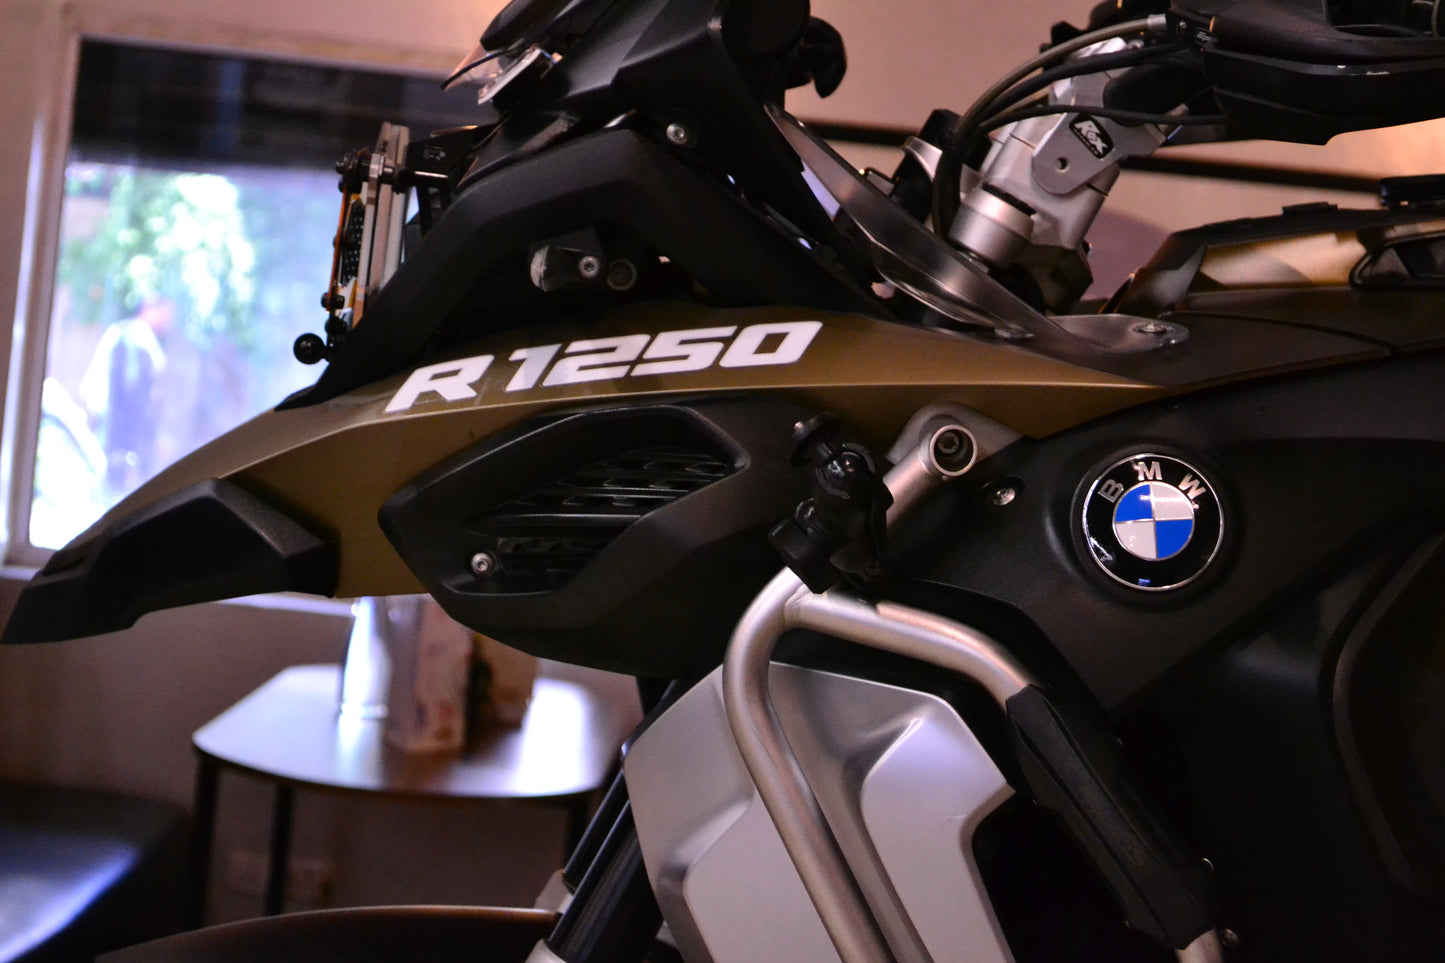 BMW R1250 GS Adventure 2021 HP Registered For Sale